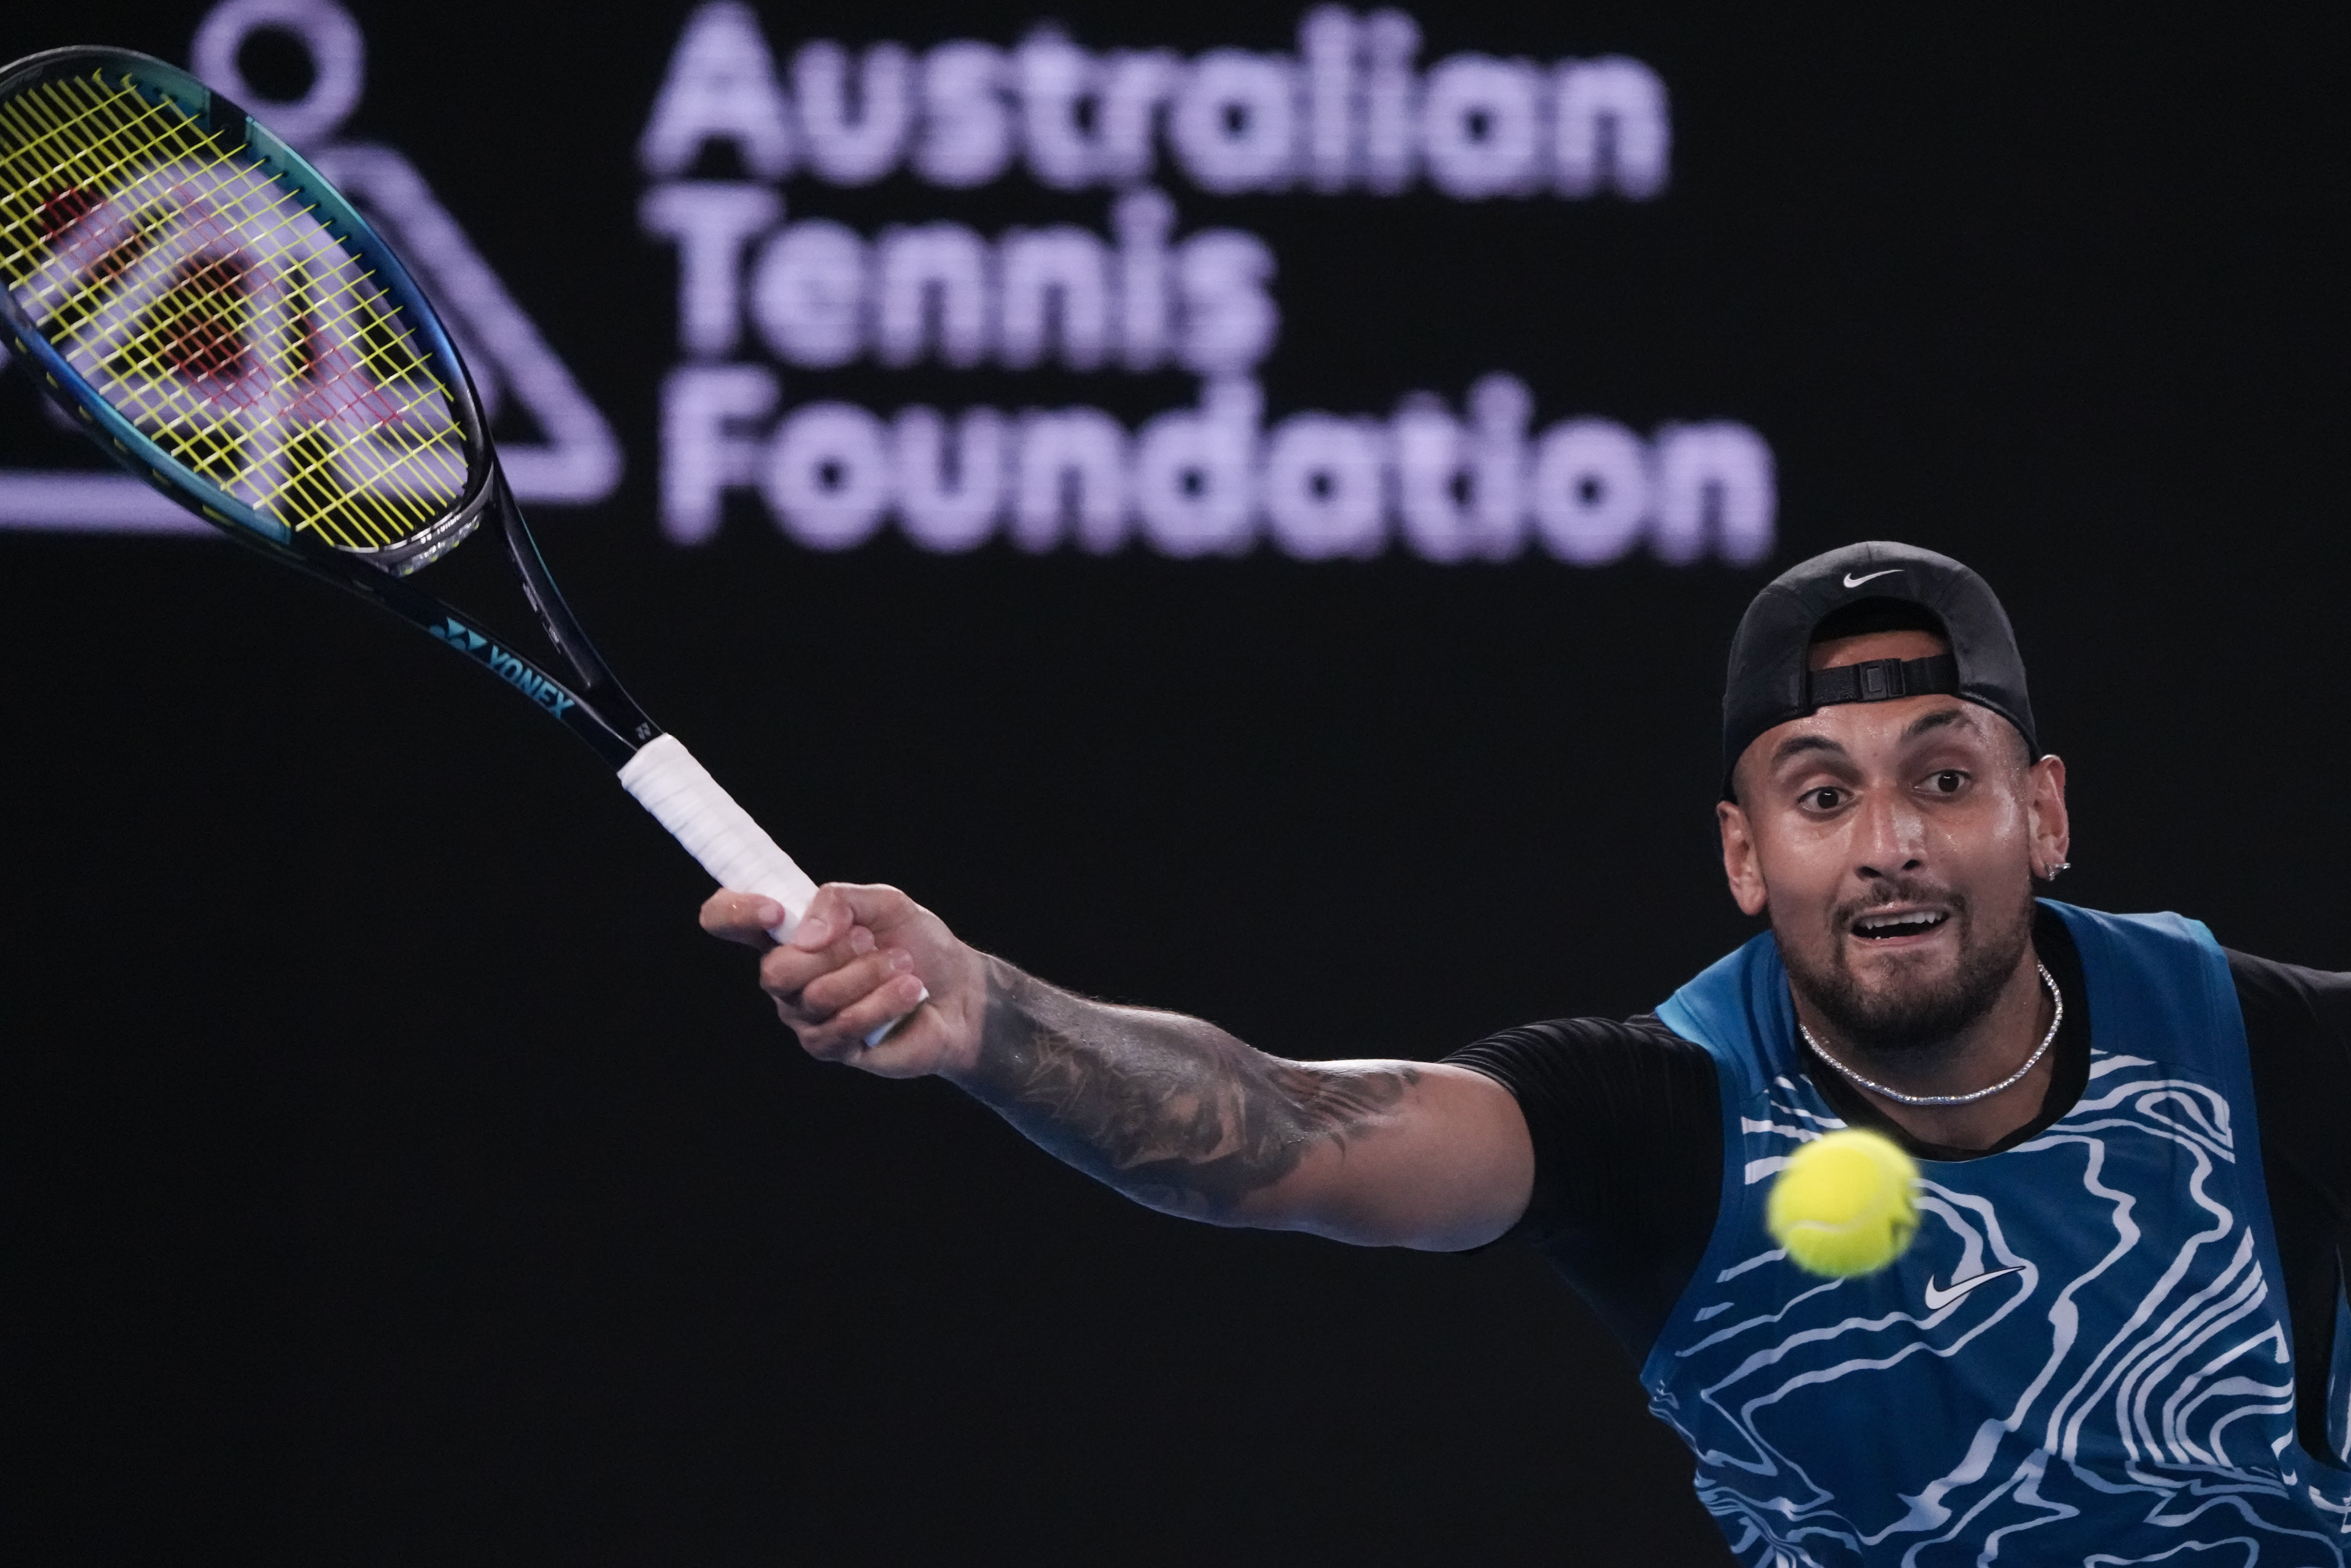 Its time for Nick Kyrgios to go out and win himself a Grand Slam